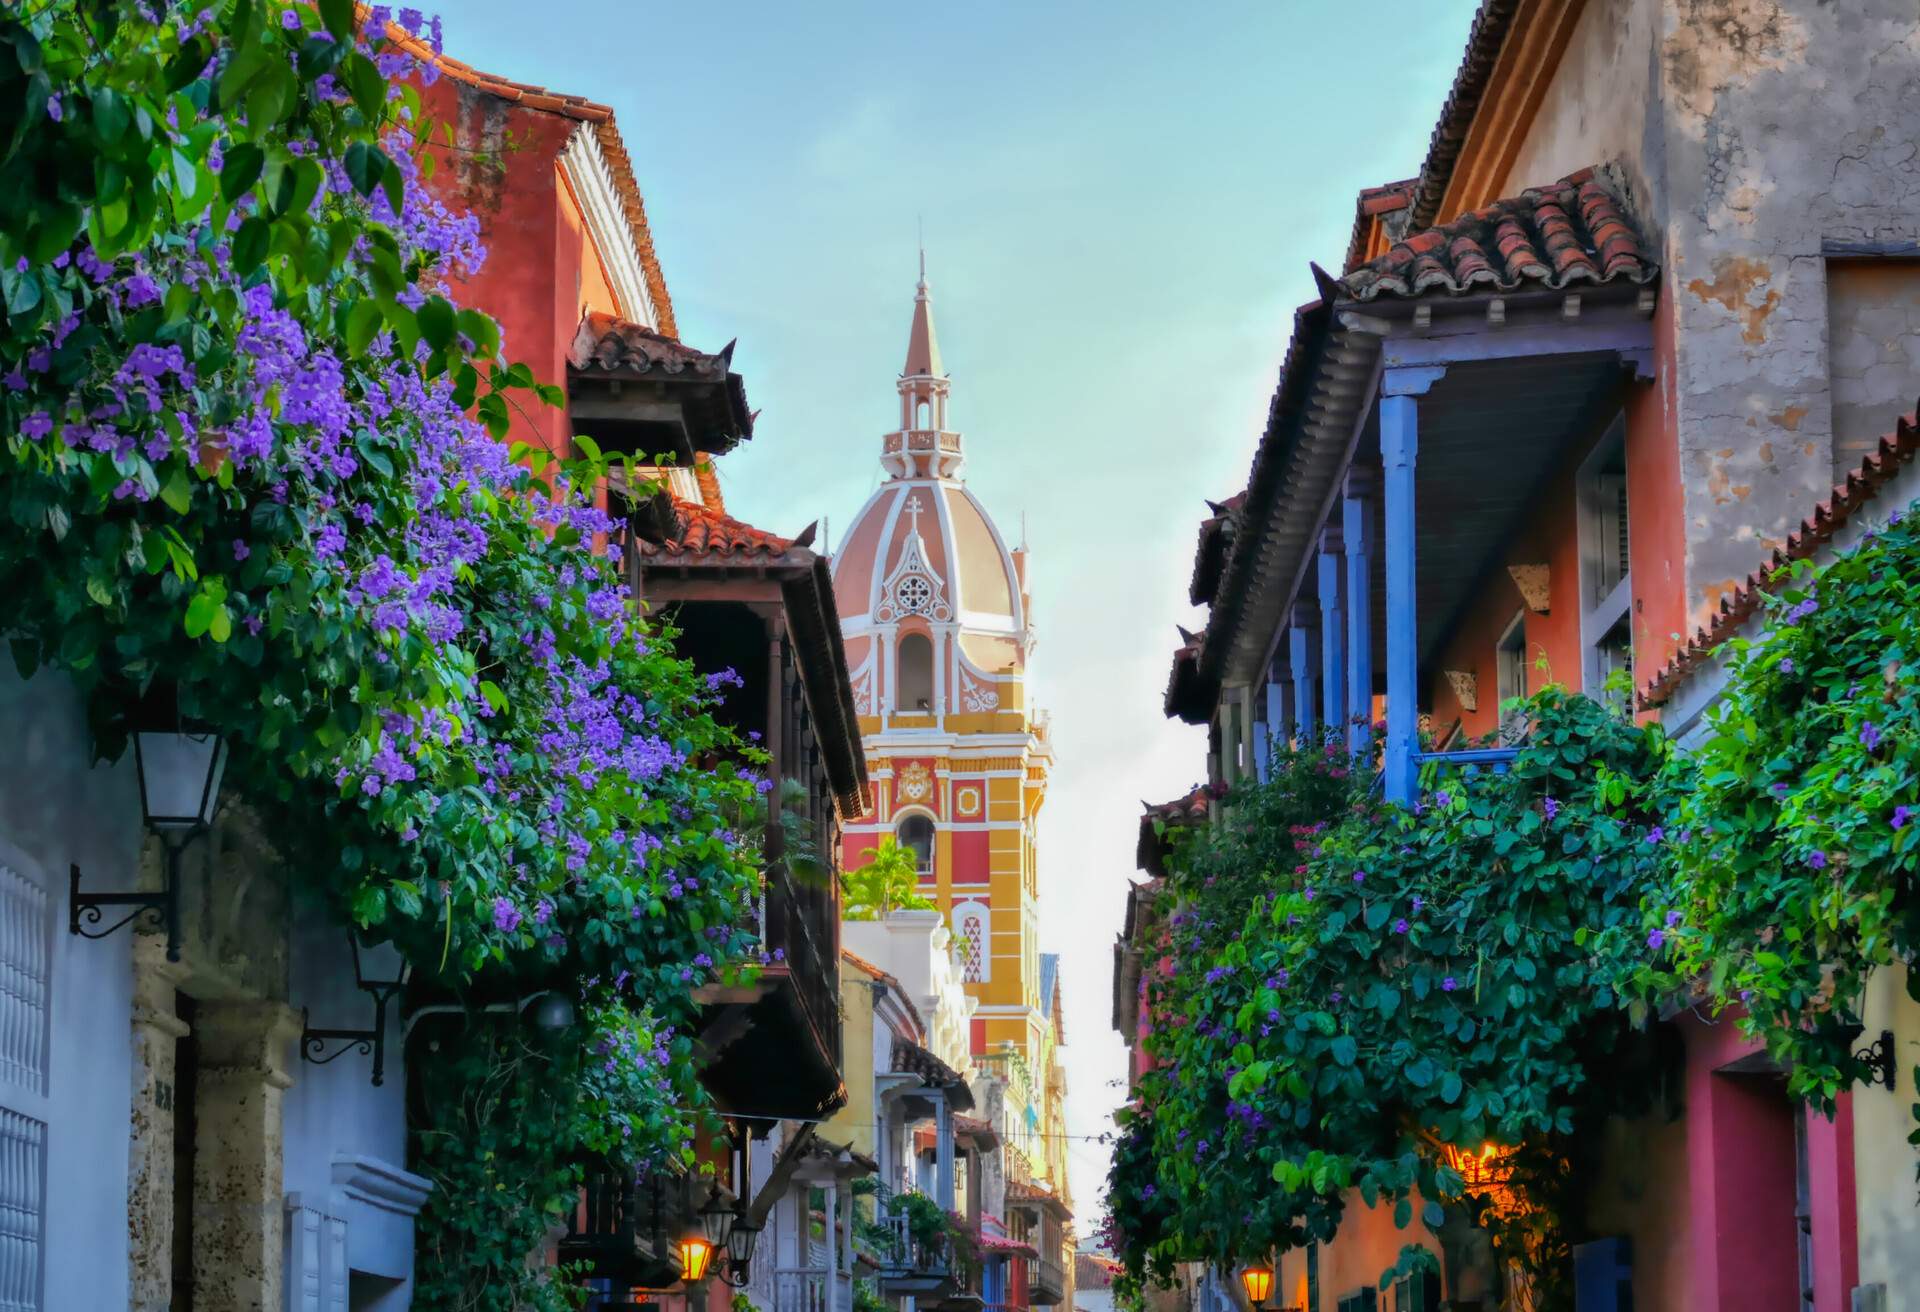 Cartagena - Colombia. Street level view of Cartagena's colonial walled city which is a UNESCO world heritage site.